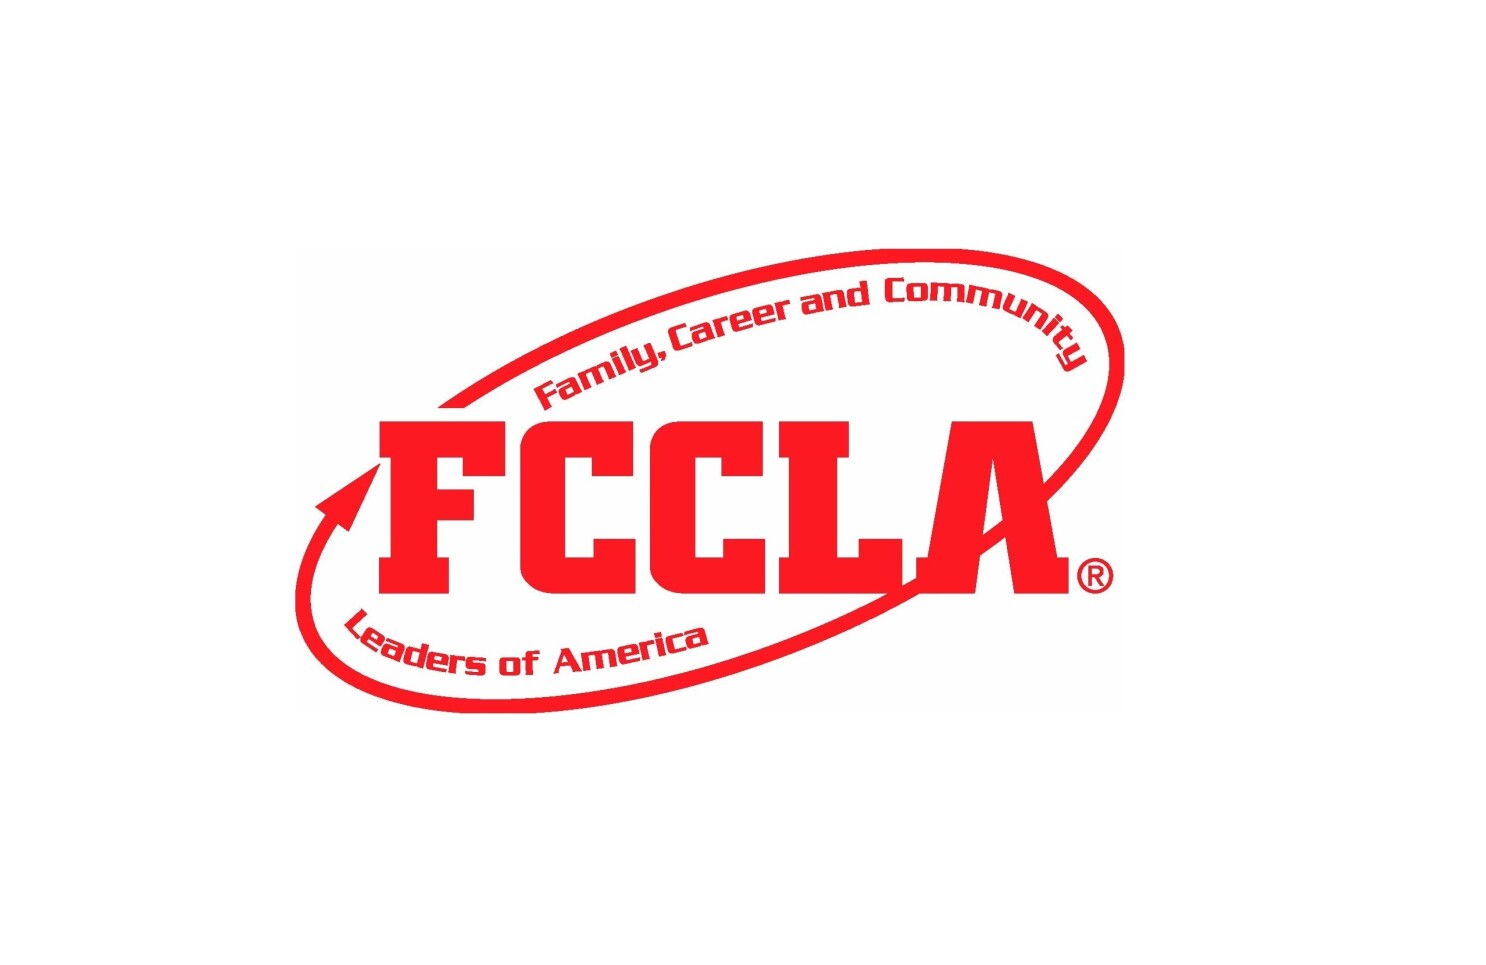 FCCLA Logo by Mitchell Republic licensed under https://www.mitchellrepublic.com/news/local/three-from-mitchells-fccla-chapter-place-in-top-ten-at-national-conference